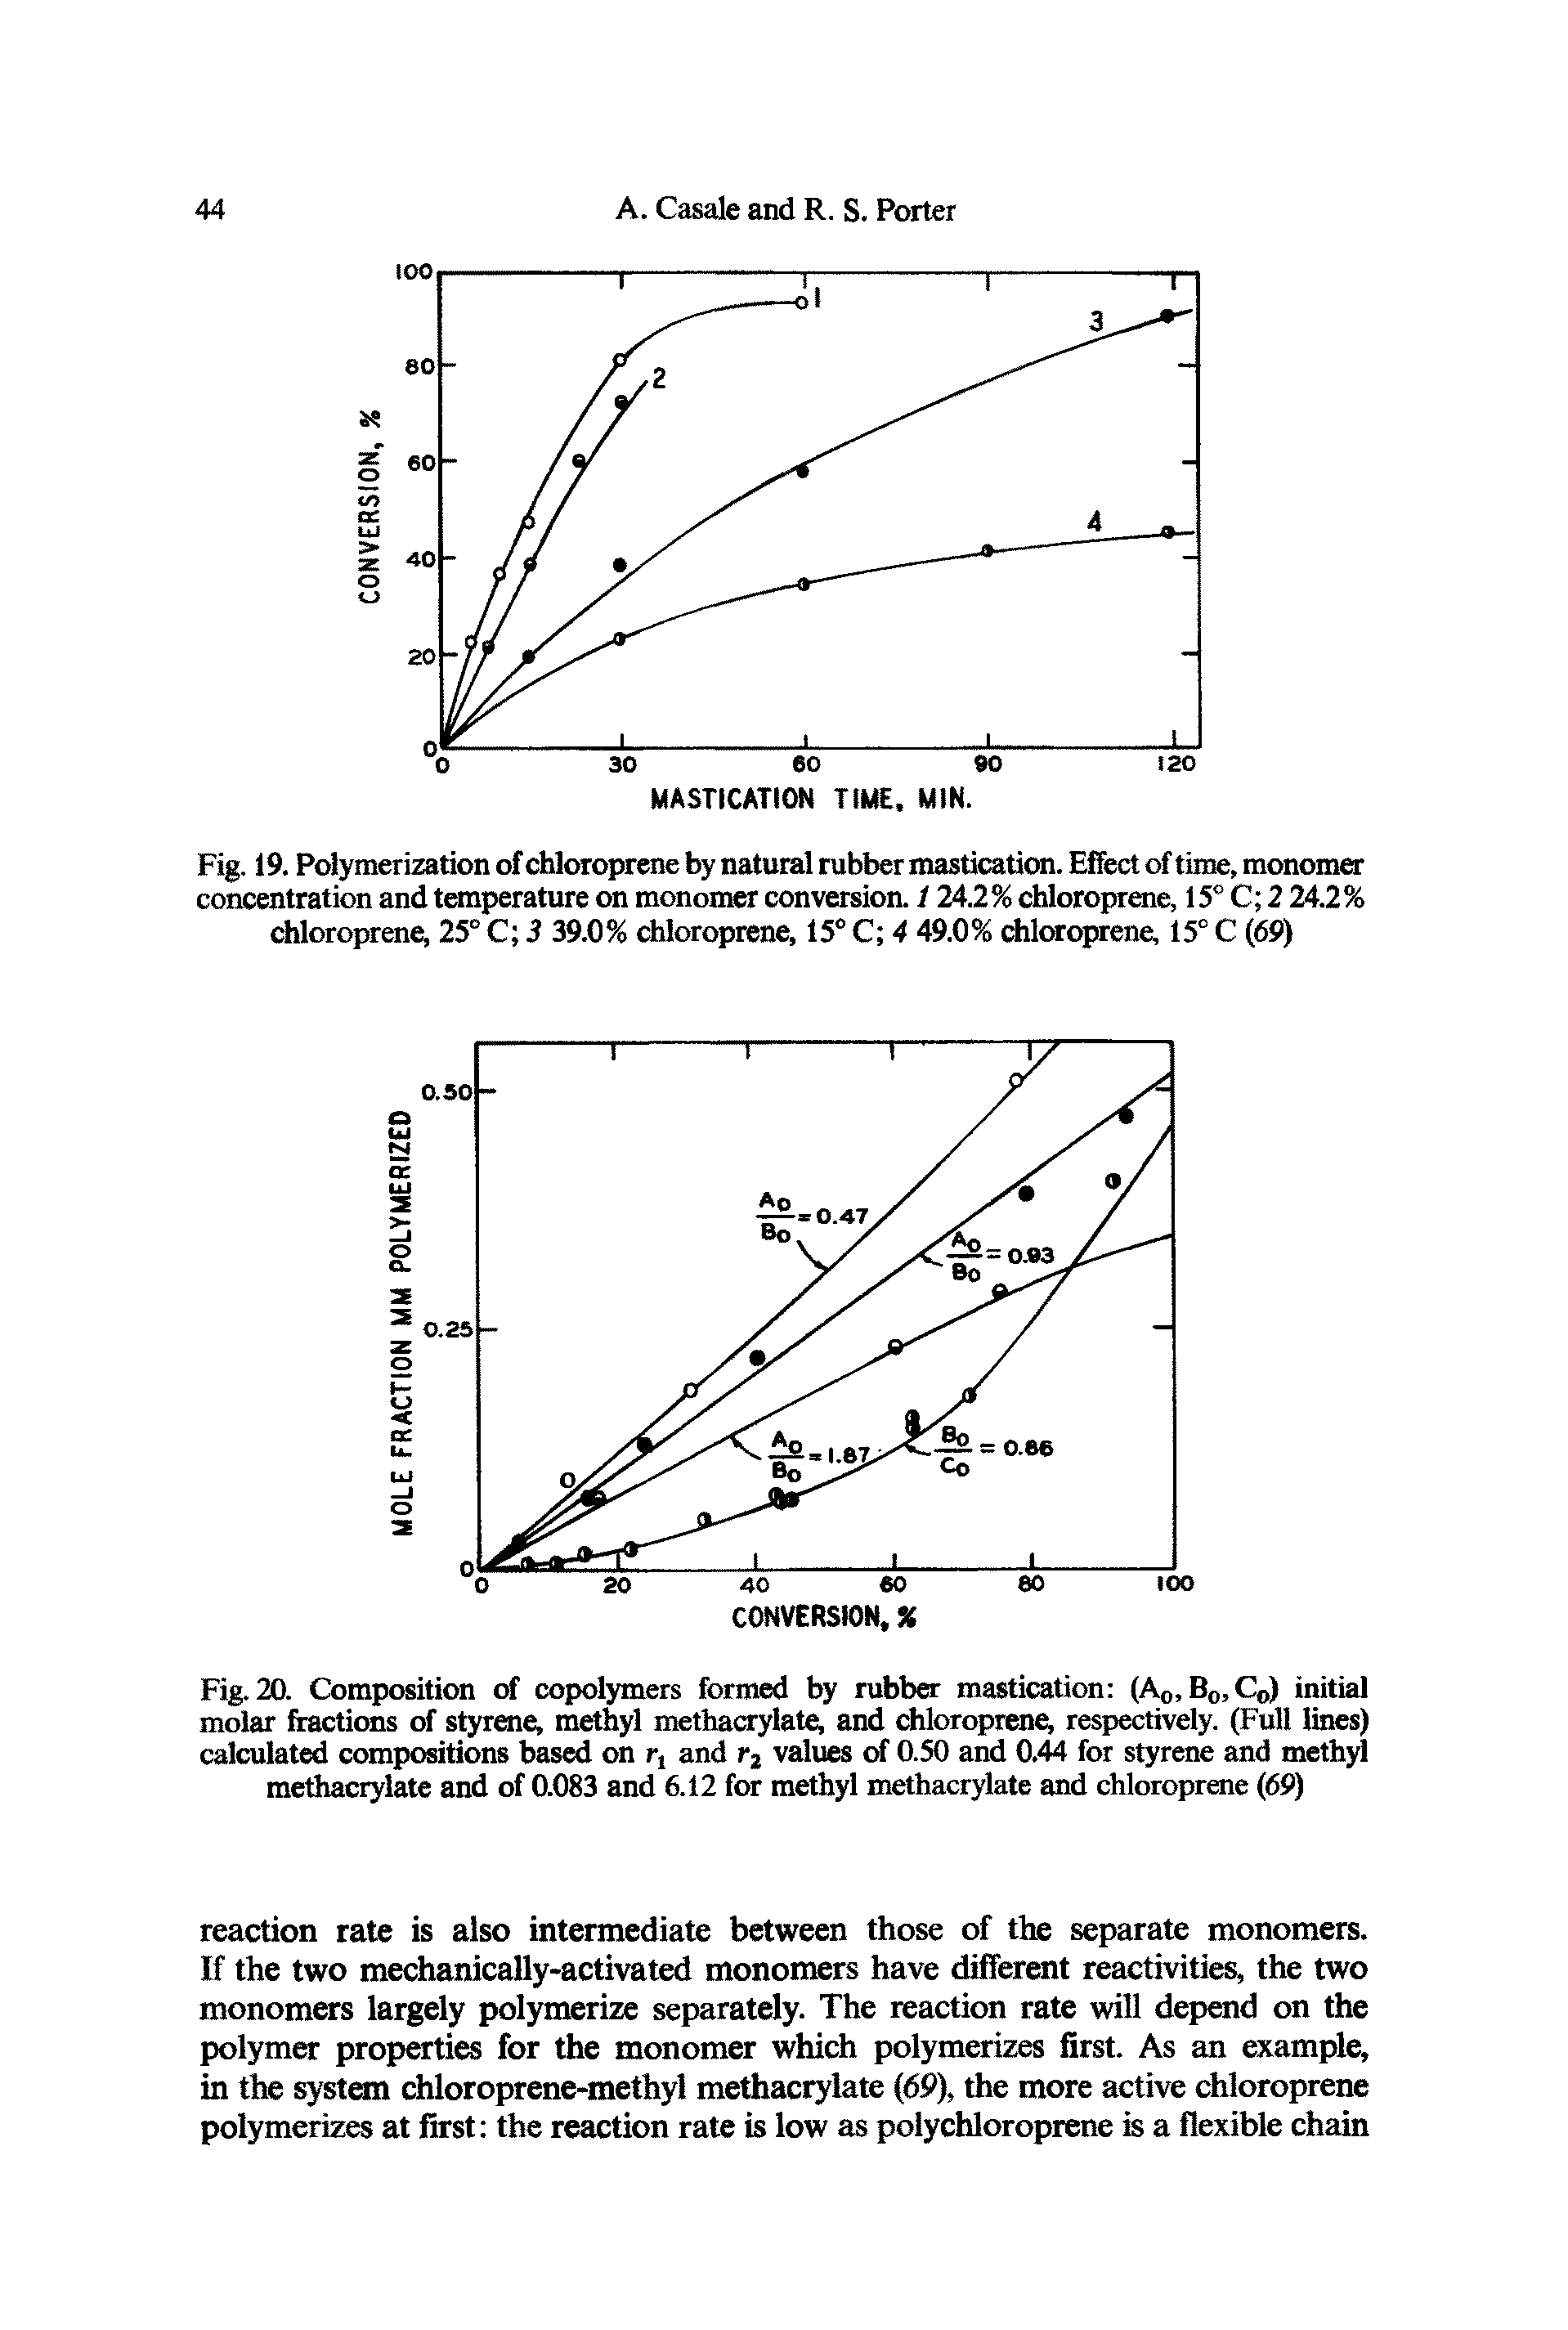 Fig. 20. Composition of copolymers formed by rubber mastication (A0, B0,C0) initial molar fractions of styrene, methyl methacrylate, and chloroprene, respectively. (Full lines) calculated compositions based on r, and r2 values of 0.50 and 0.44 for styrene and methyl methacrylate and of 0.083 and 6.12 for methyl methacrylate and chloroprene (69)...